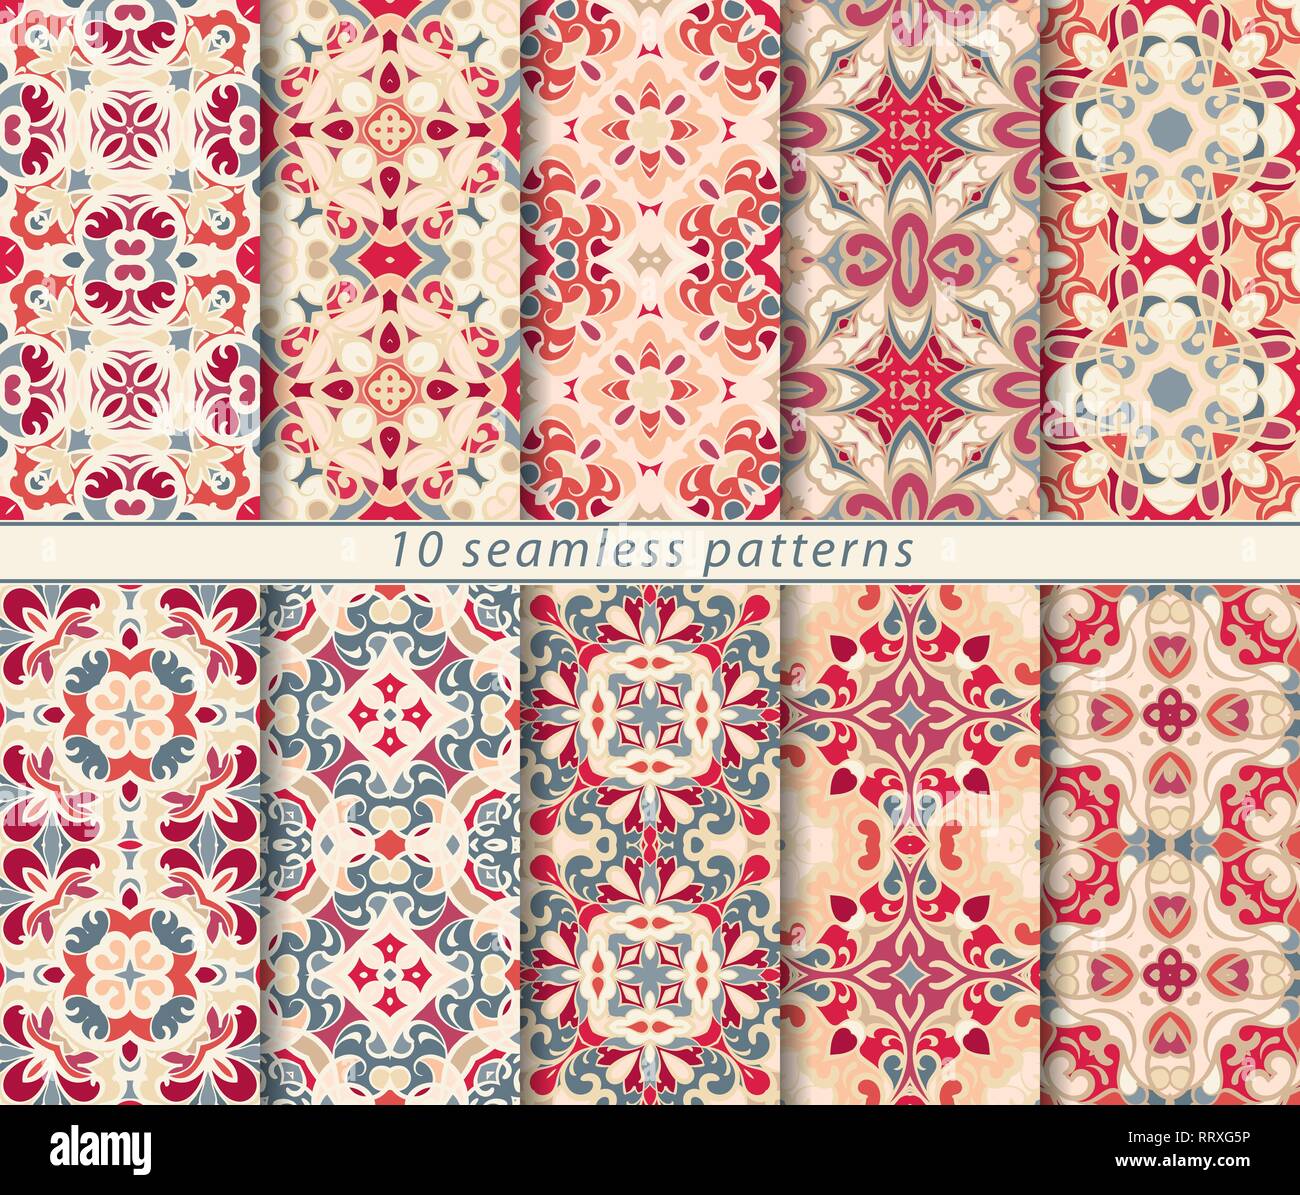 Ten seamless patterns in Oriental style. Eastern ornaments for design fabric, wrapping paper or scrapbooking. Vector illustration in red colors. Stock Vector